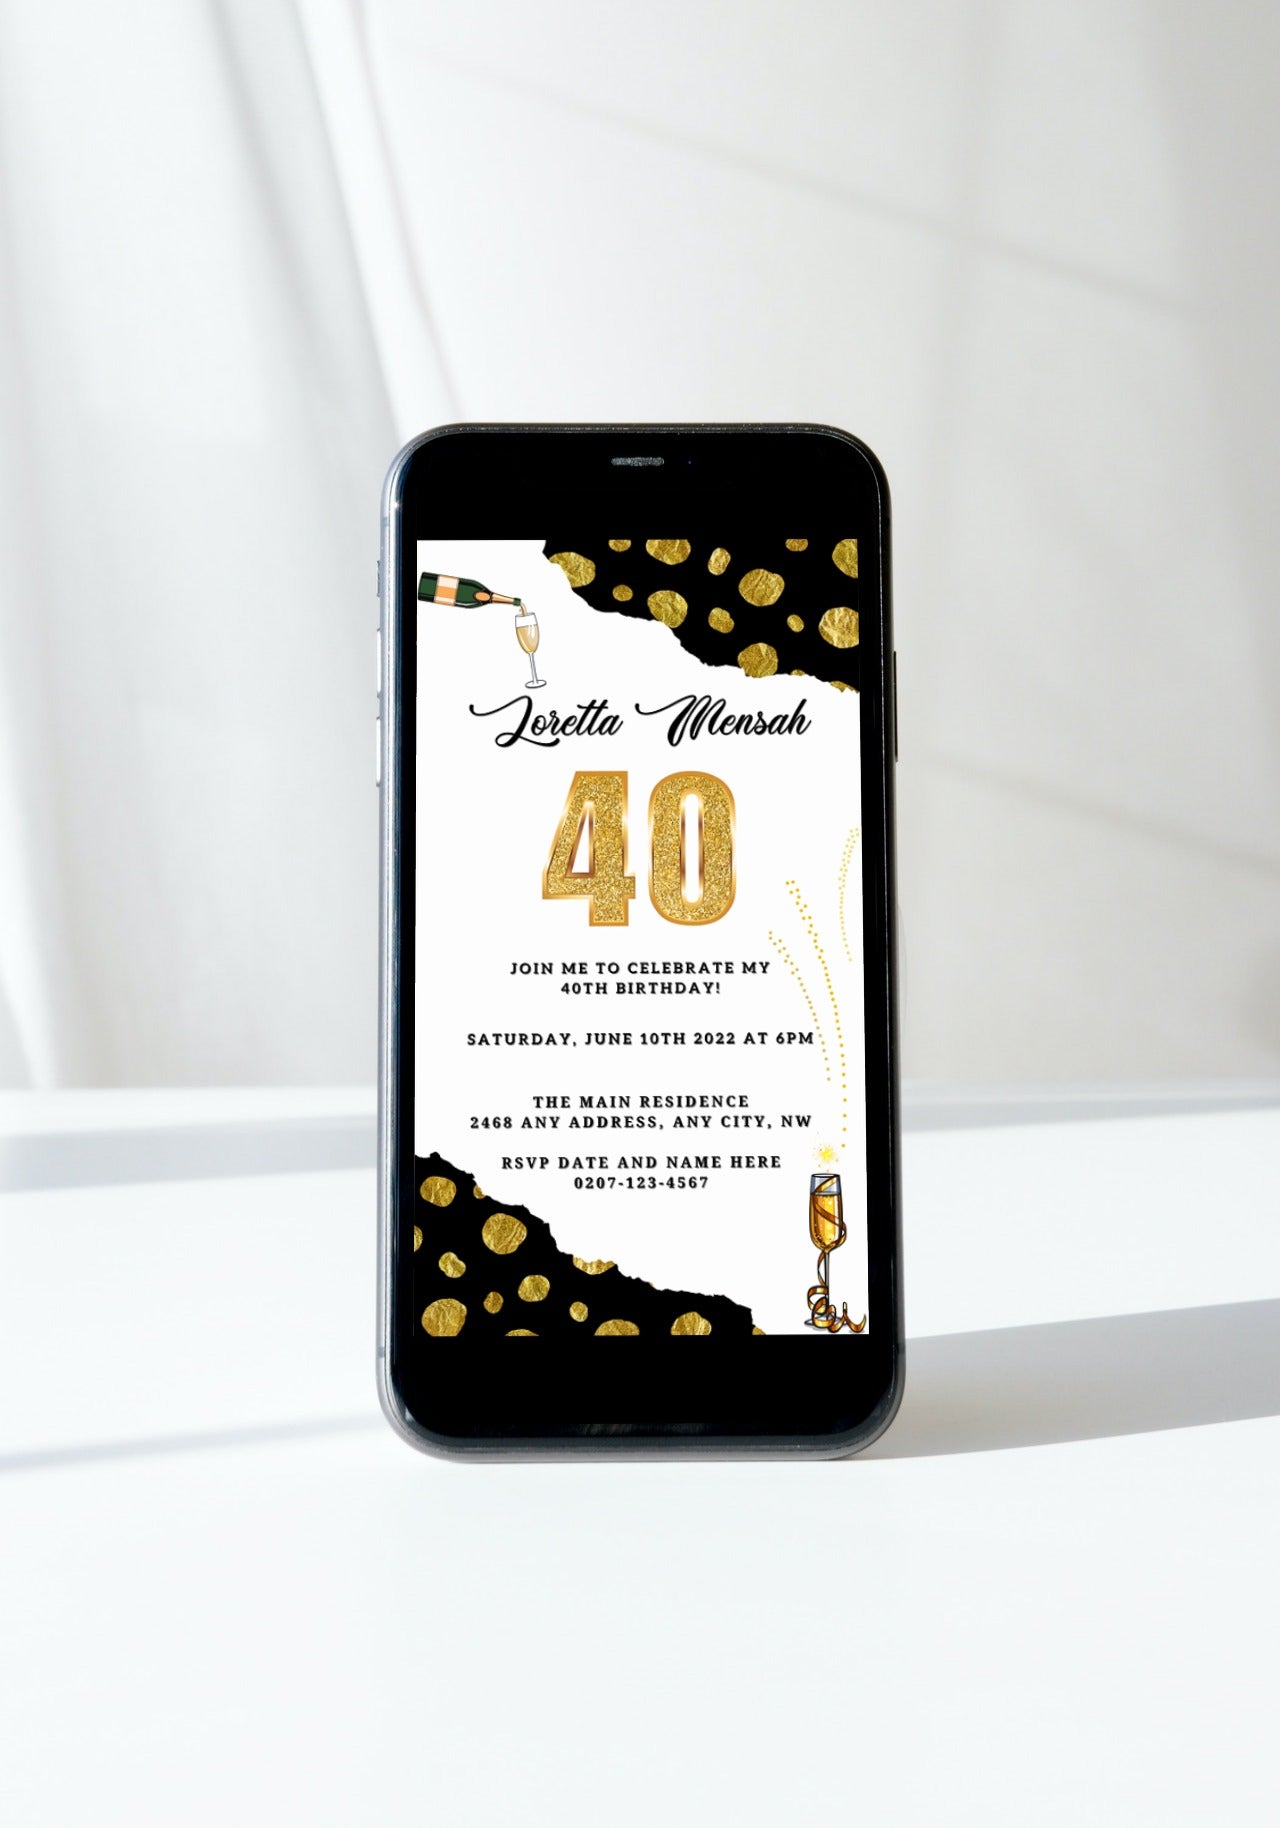 White Leopard Gold Black Customisable 40th Evite displayed on a smartphone, featuring editable text and design elements for personalizing invitations using Canva.